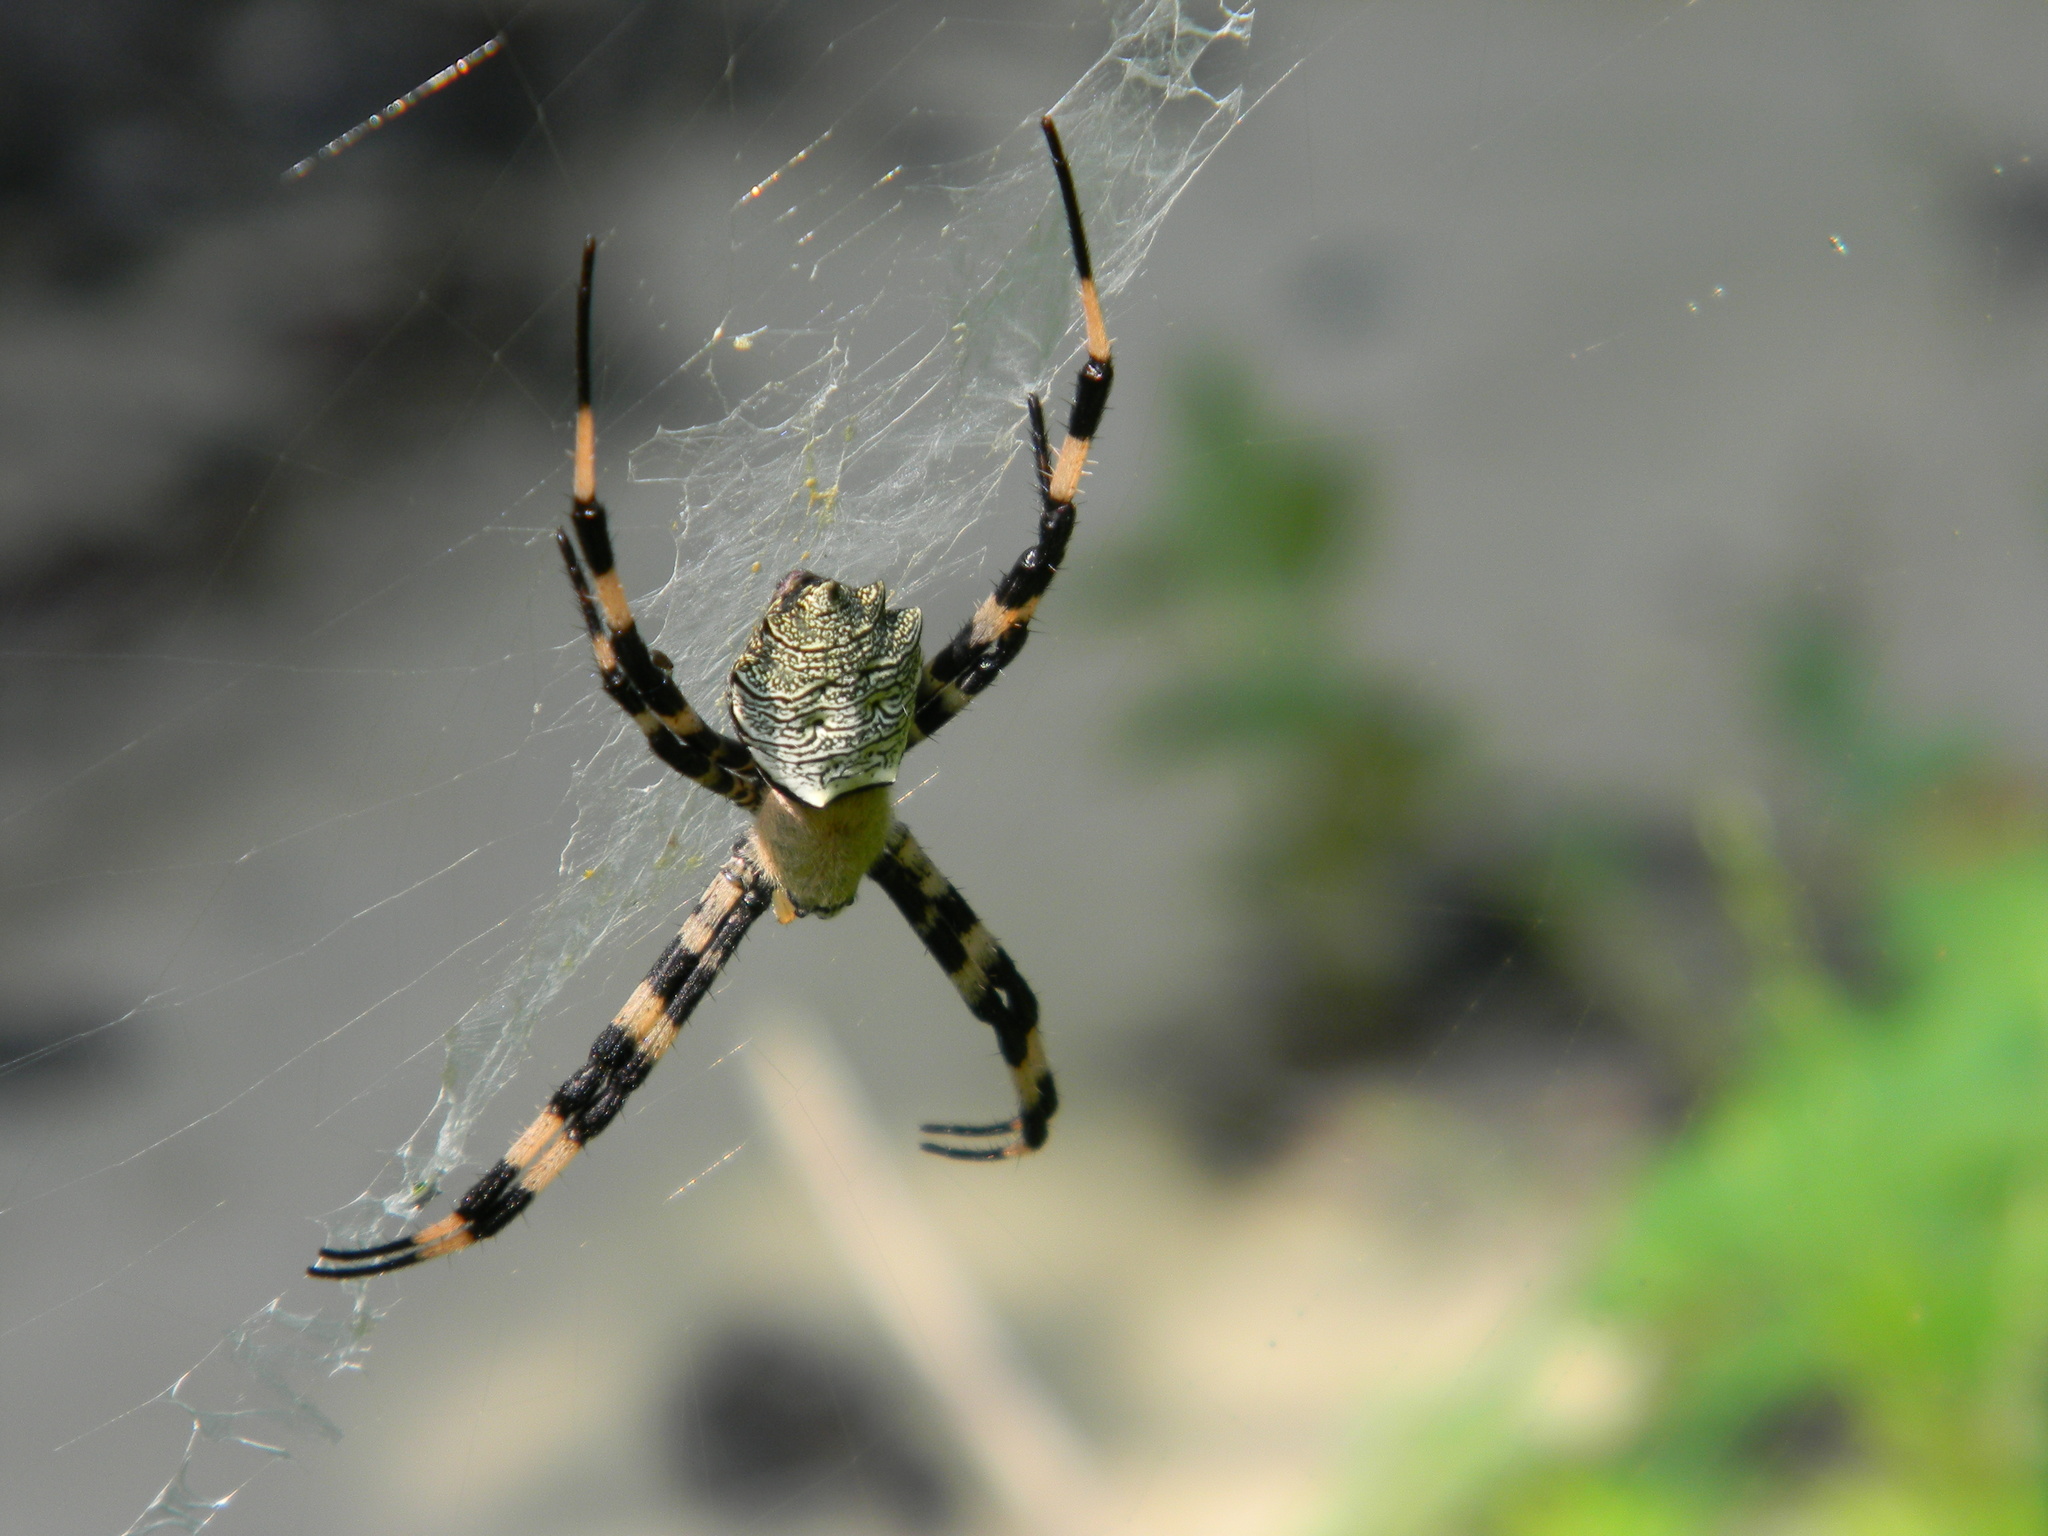 Flavipalpis argiope Molting interferes